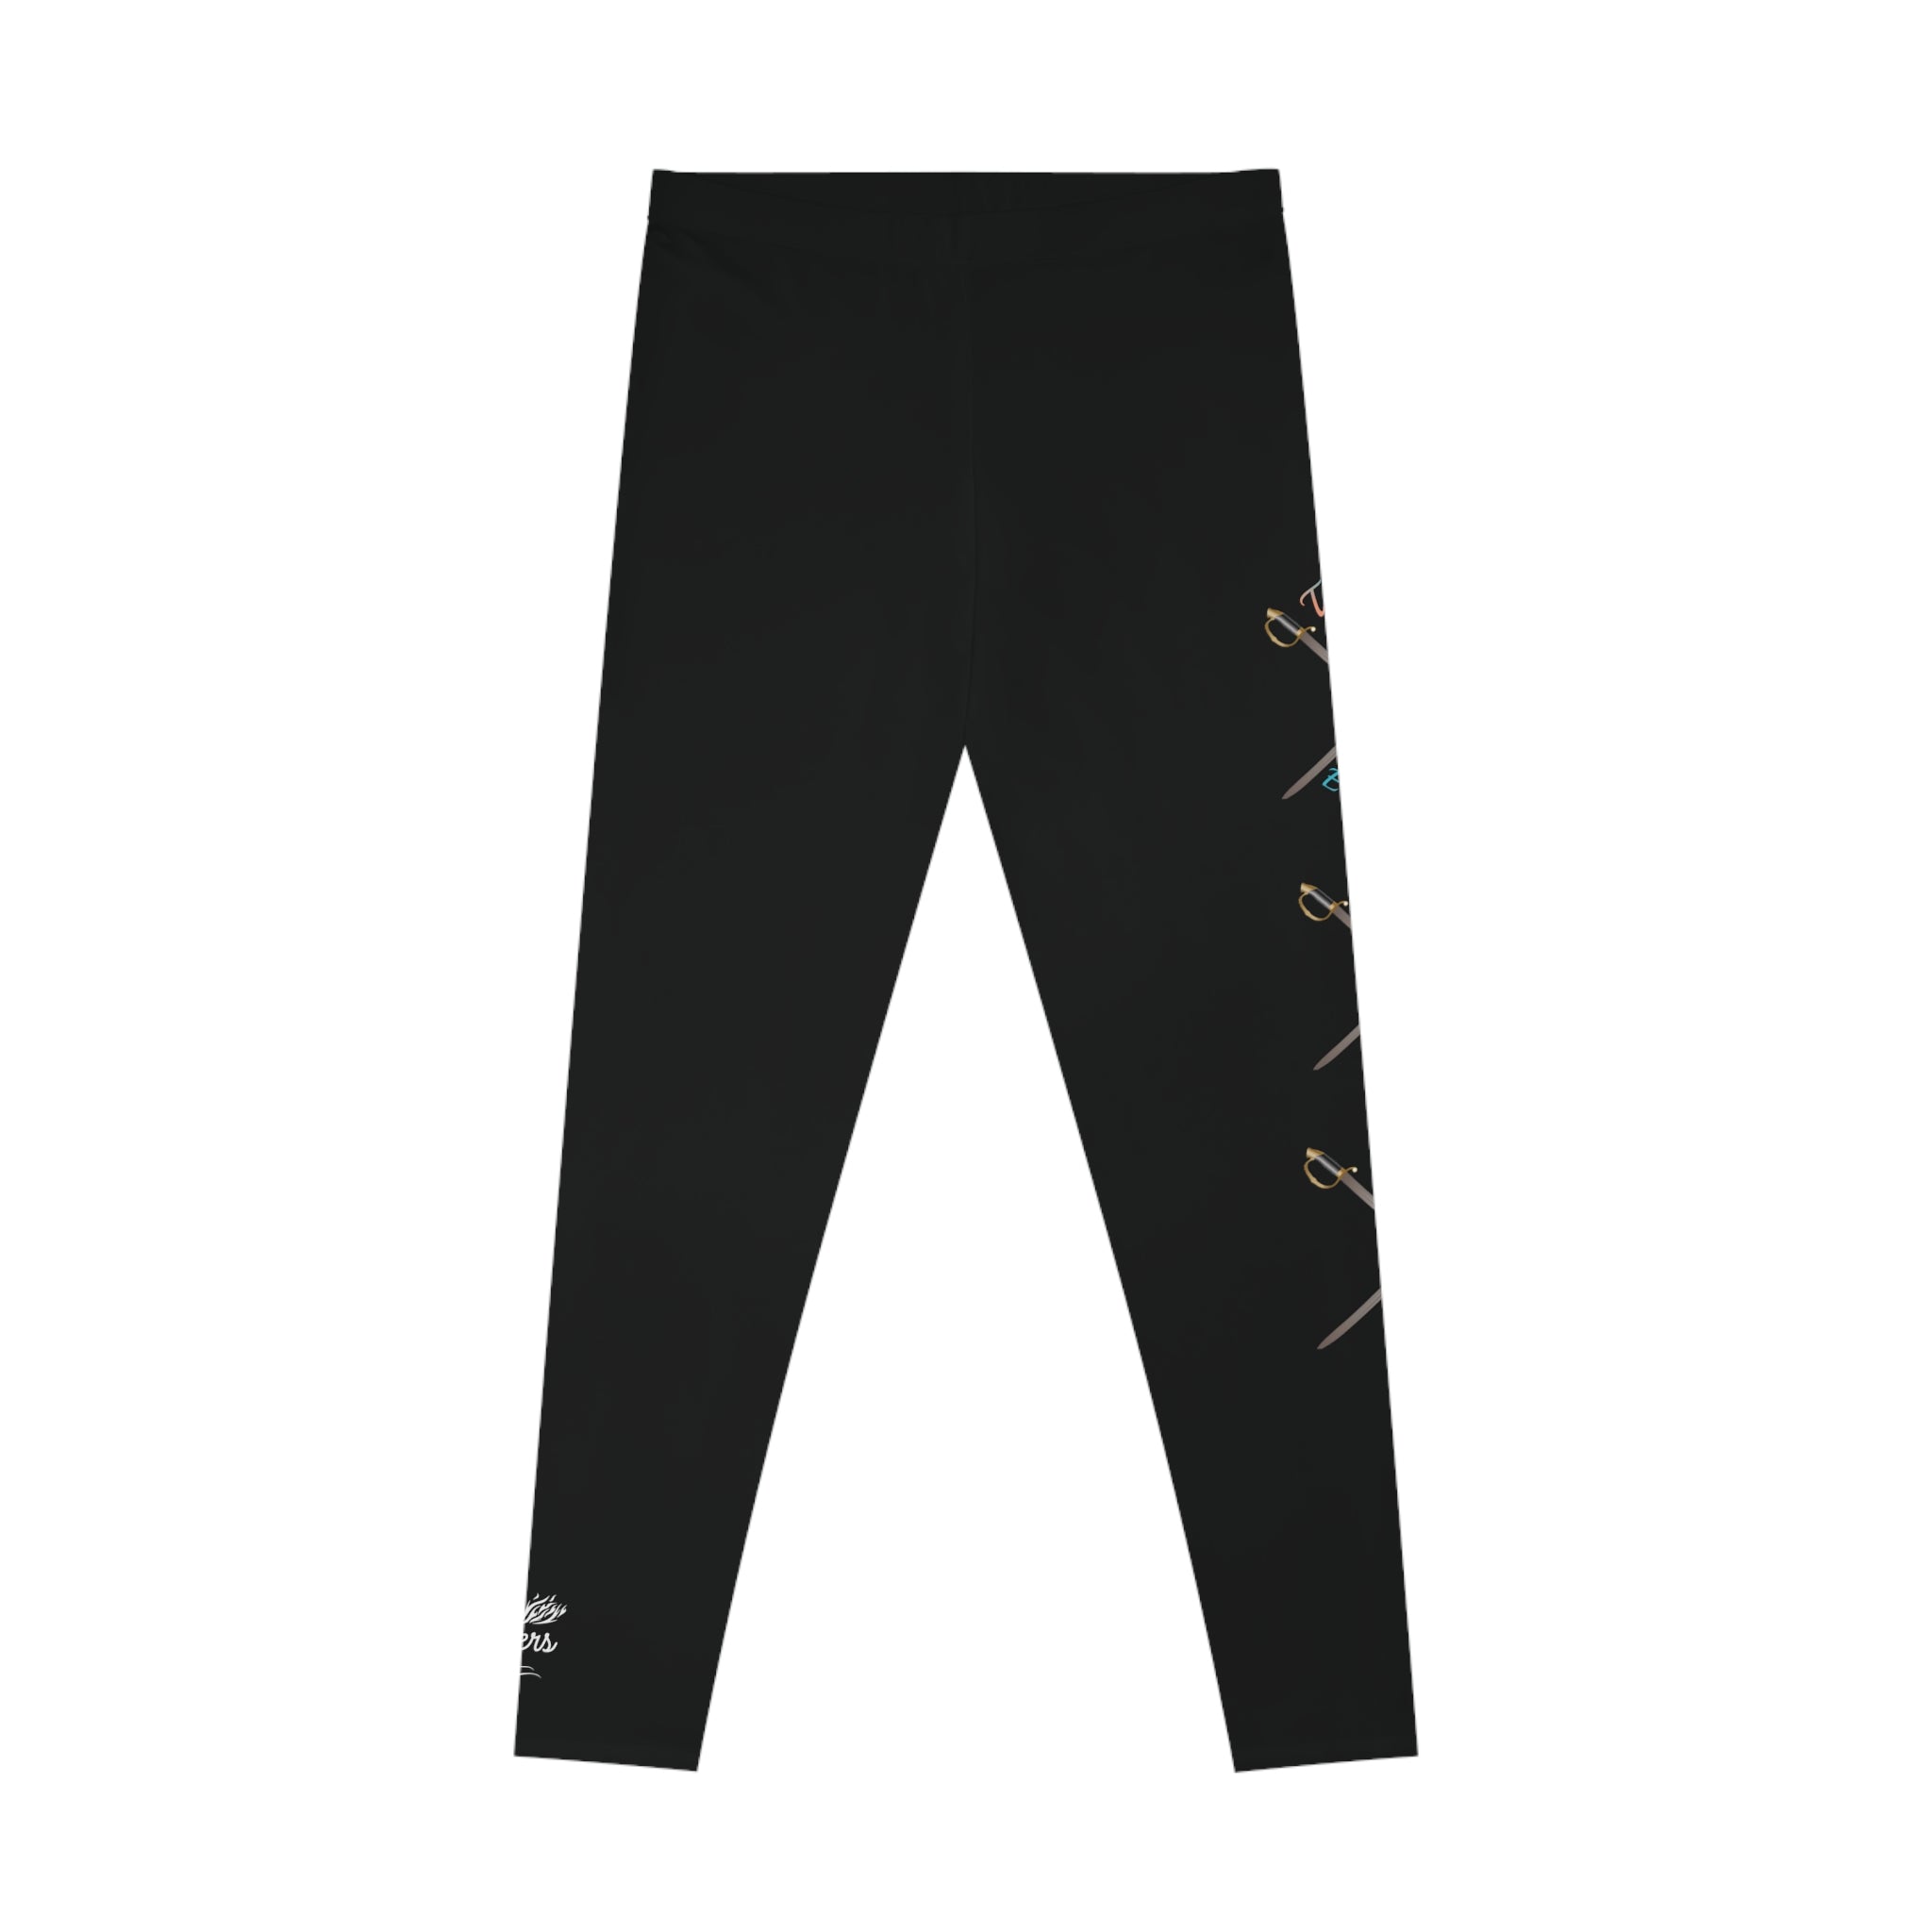 Sassy Pants leggings & more by Sparrow Apparel